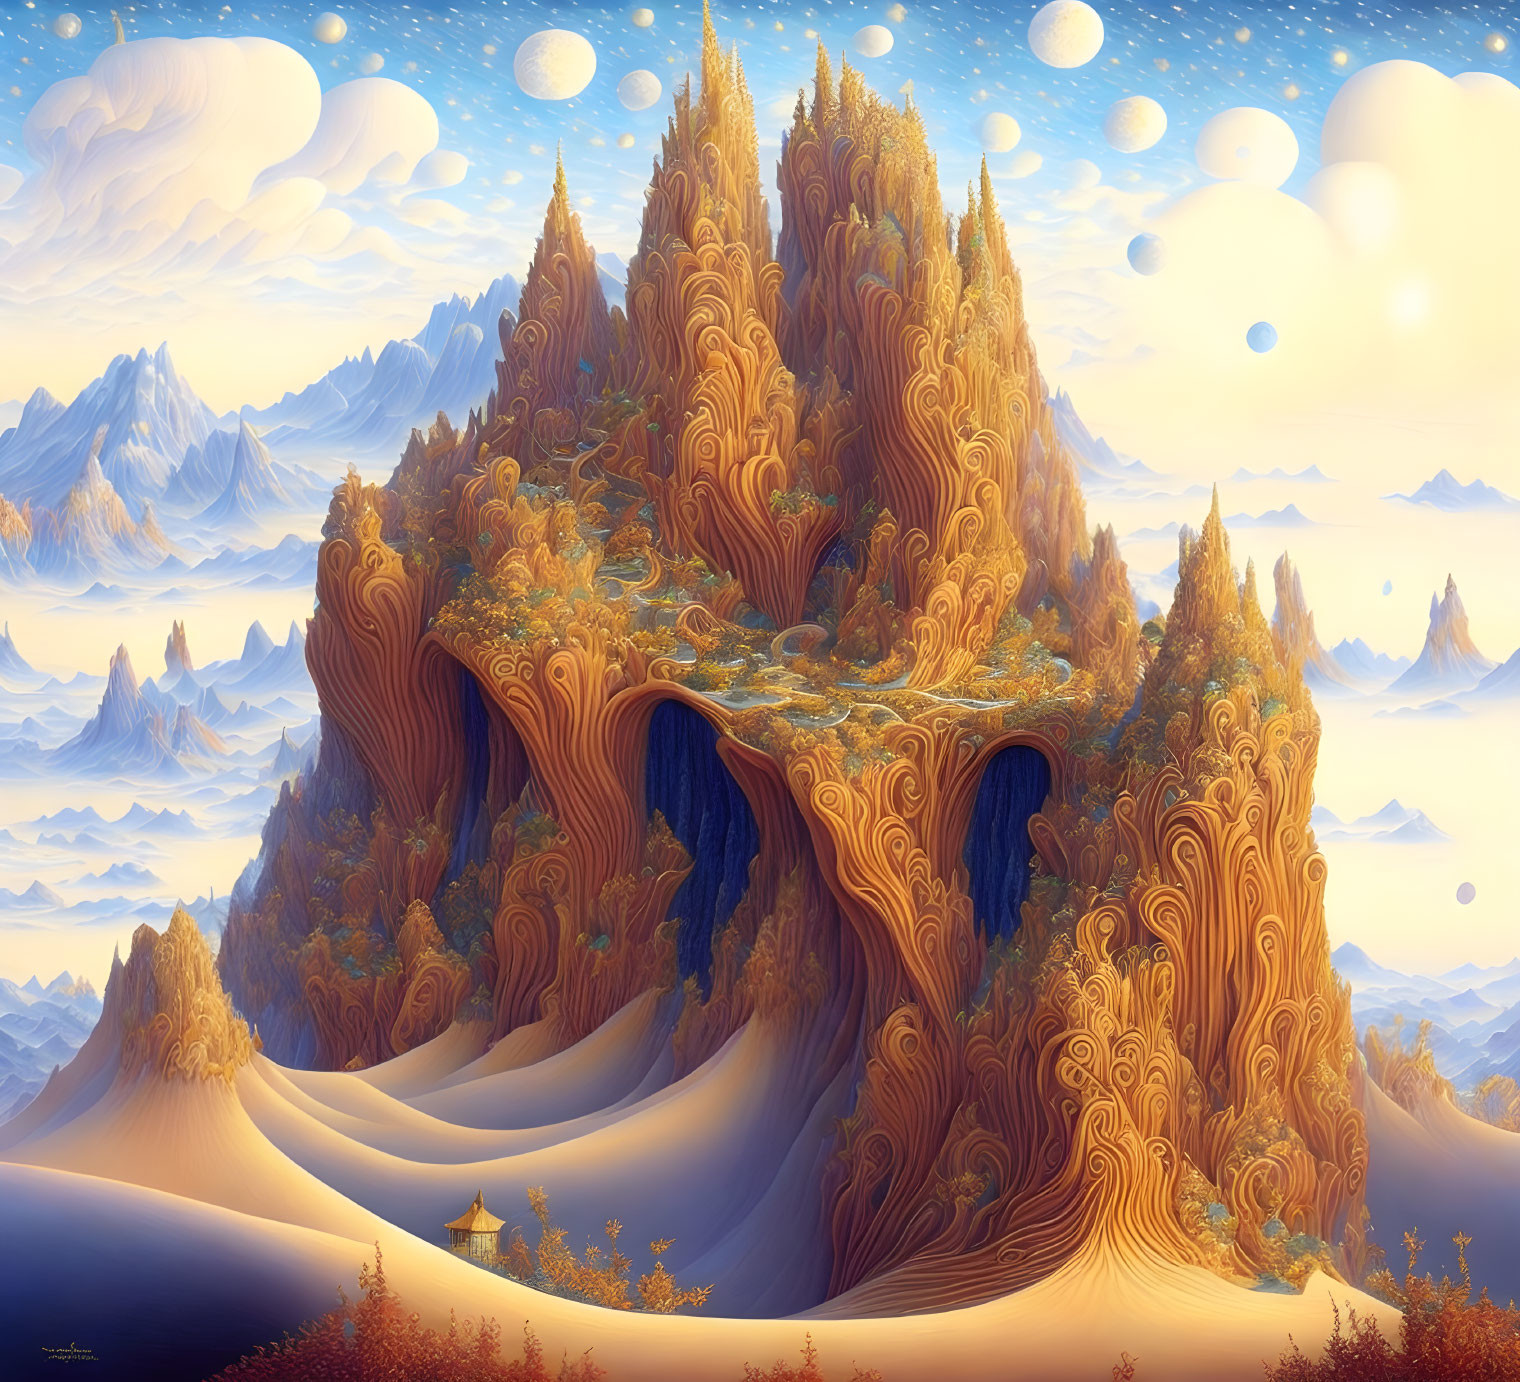 Whimsical landscape with spiral mountain and floating orbs